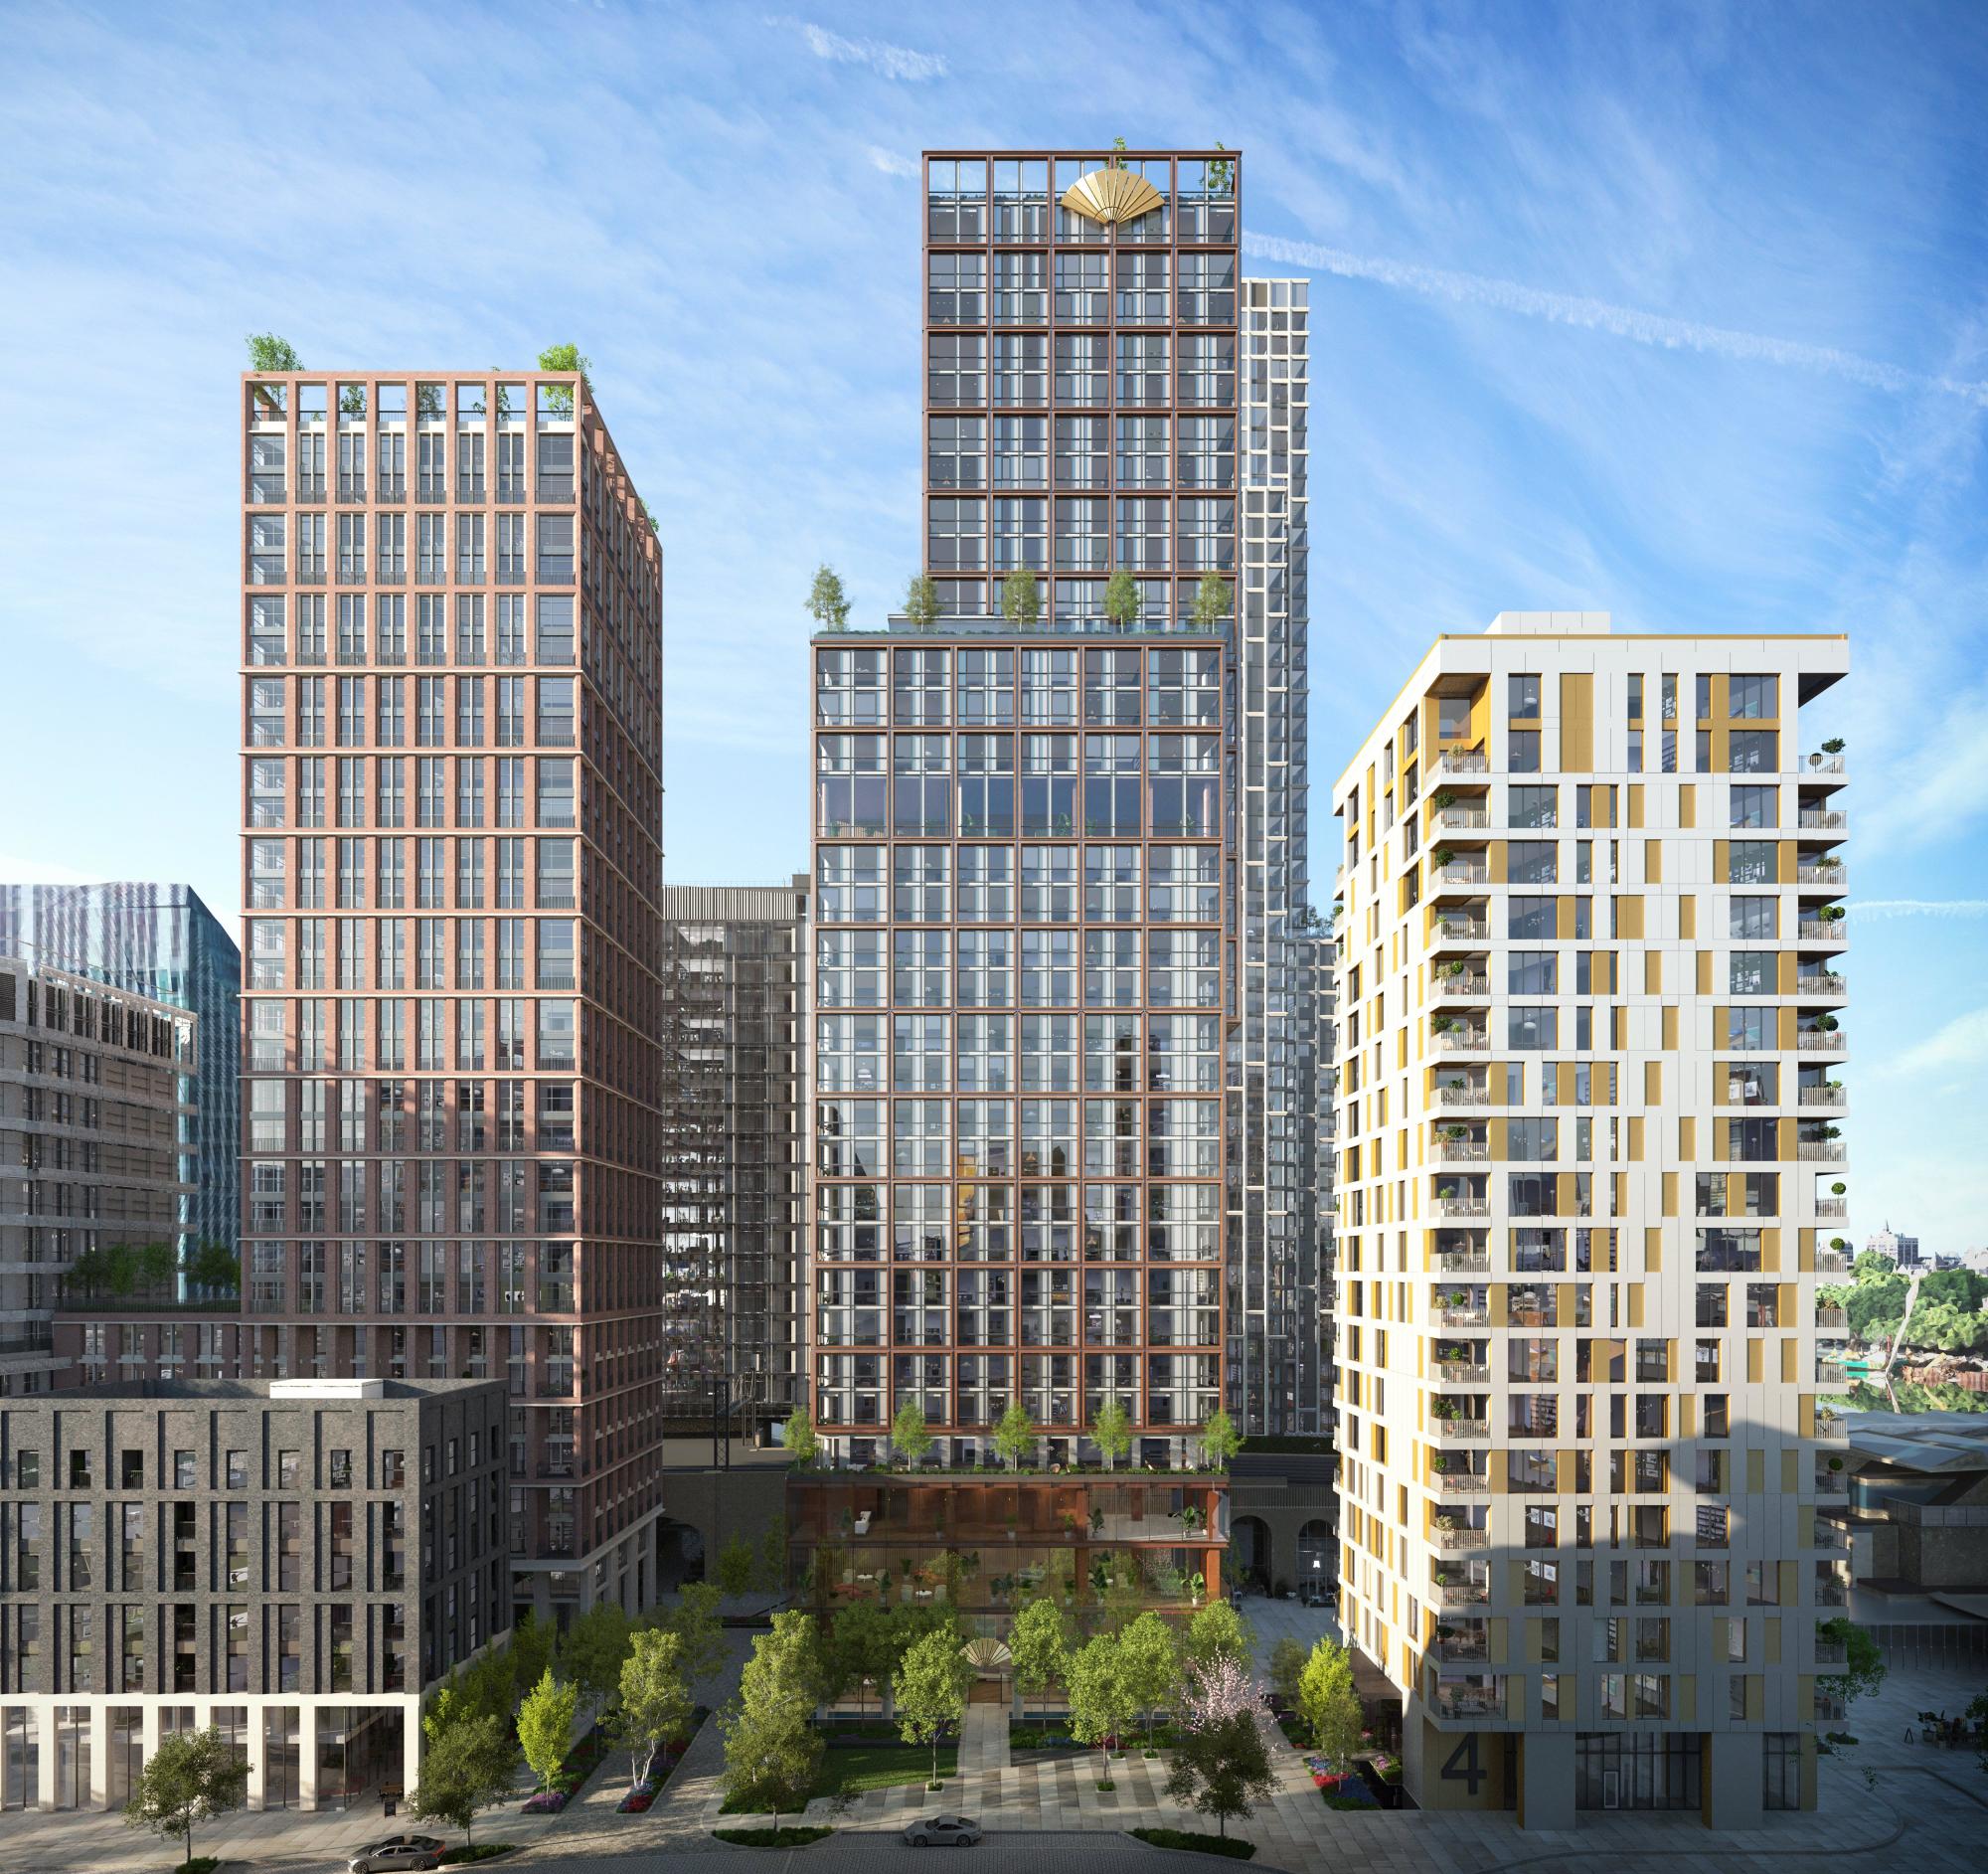 Planning Granted for Mandarin Oriental Hotel in London’s South Bank